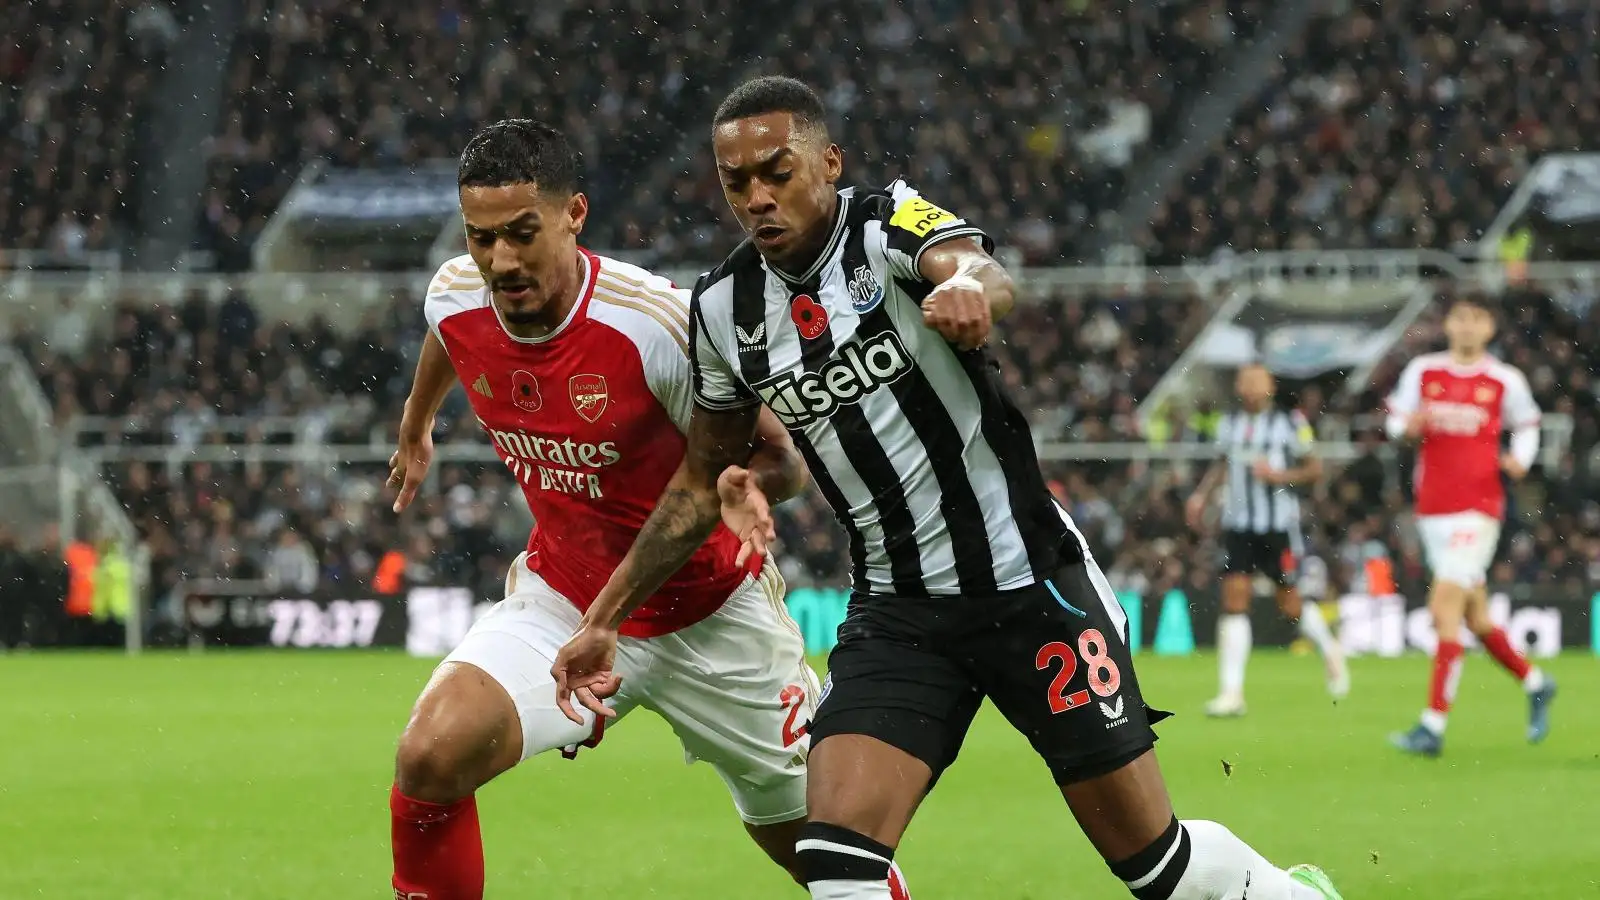 Newcastle Release Statement About Racist Insults Against Guimarães And Willock